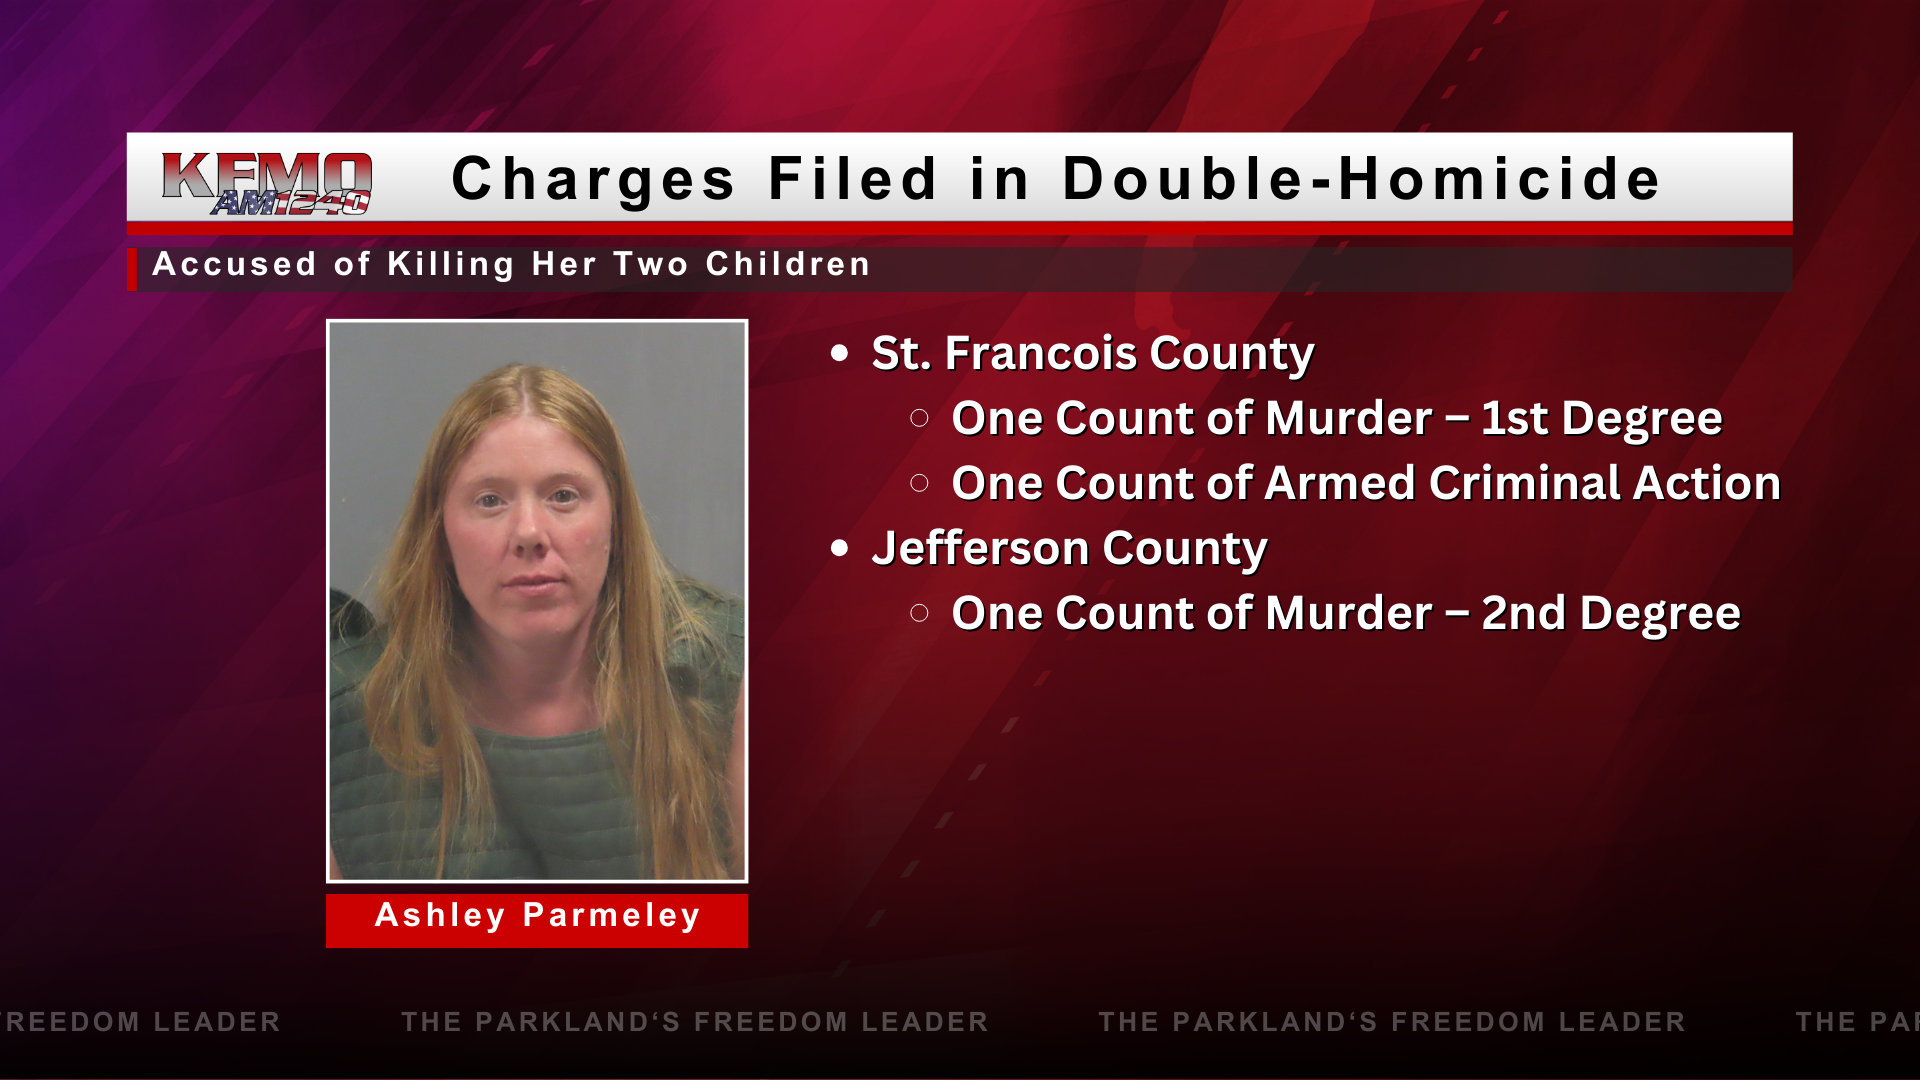 Additional Charges Filed in Double-Homicide